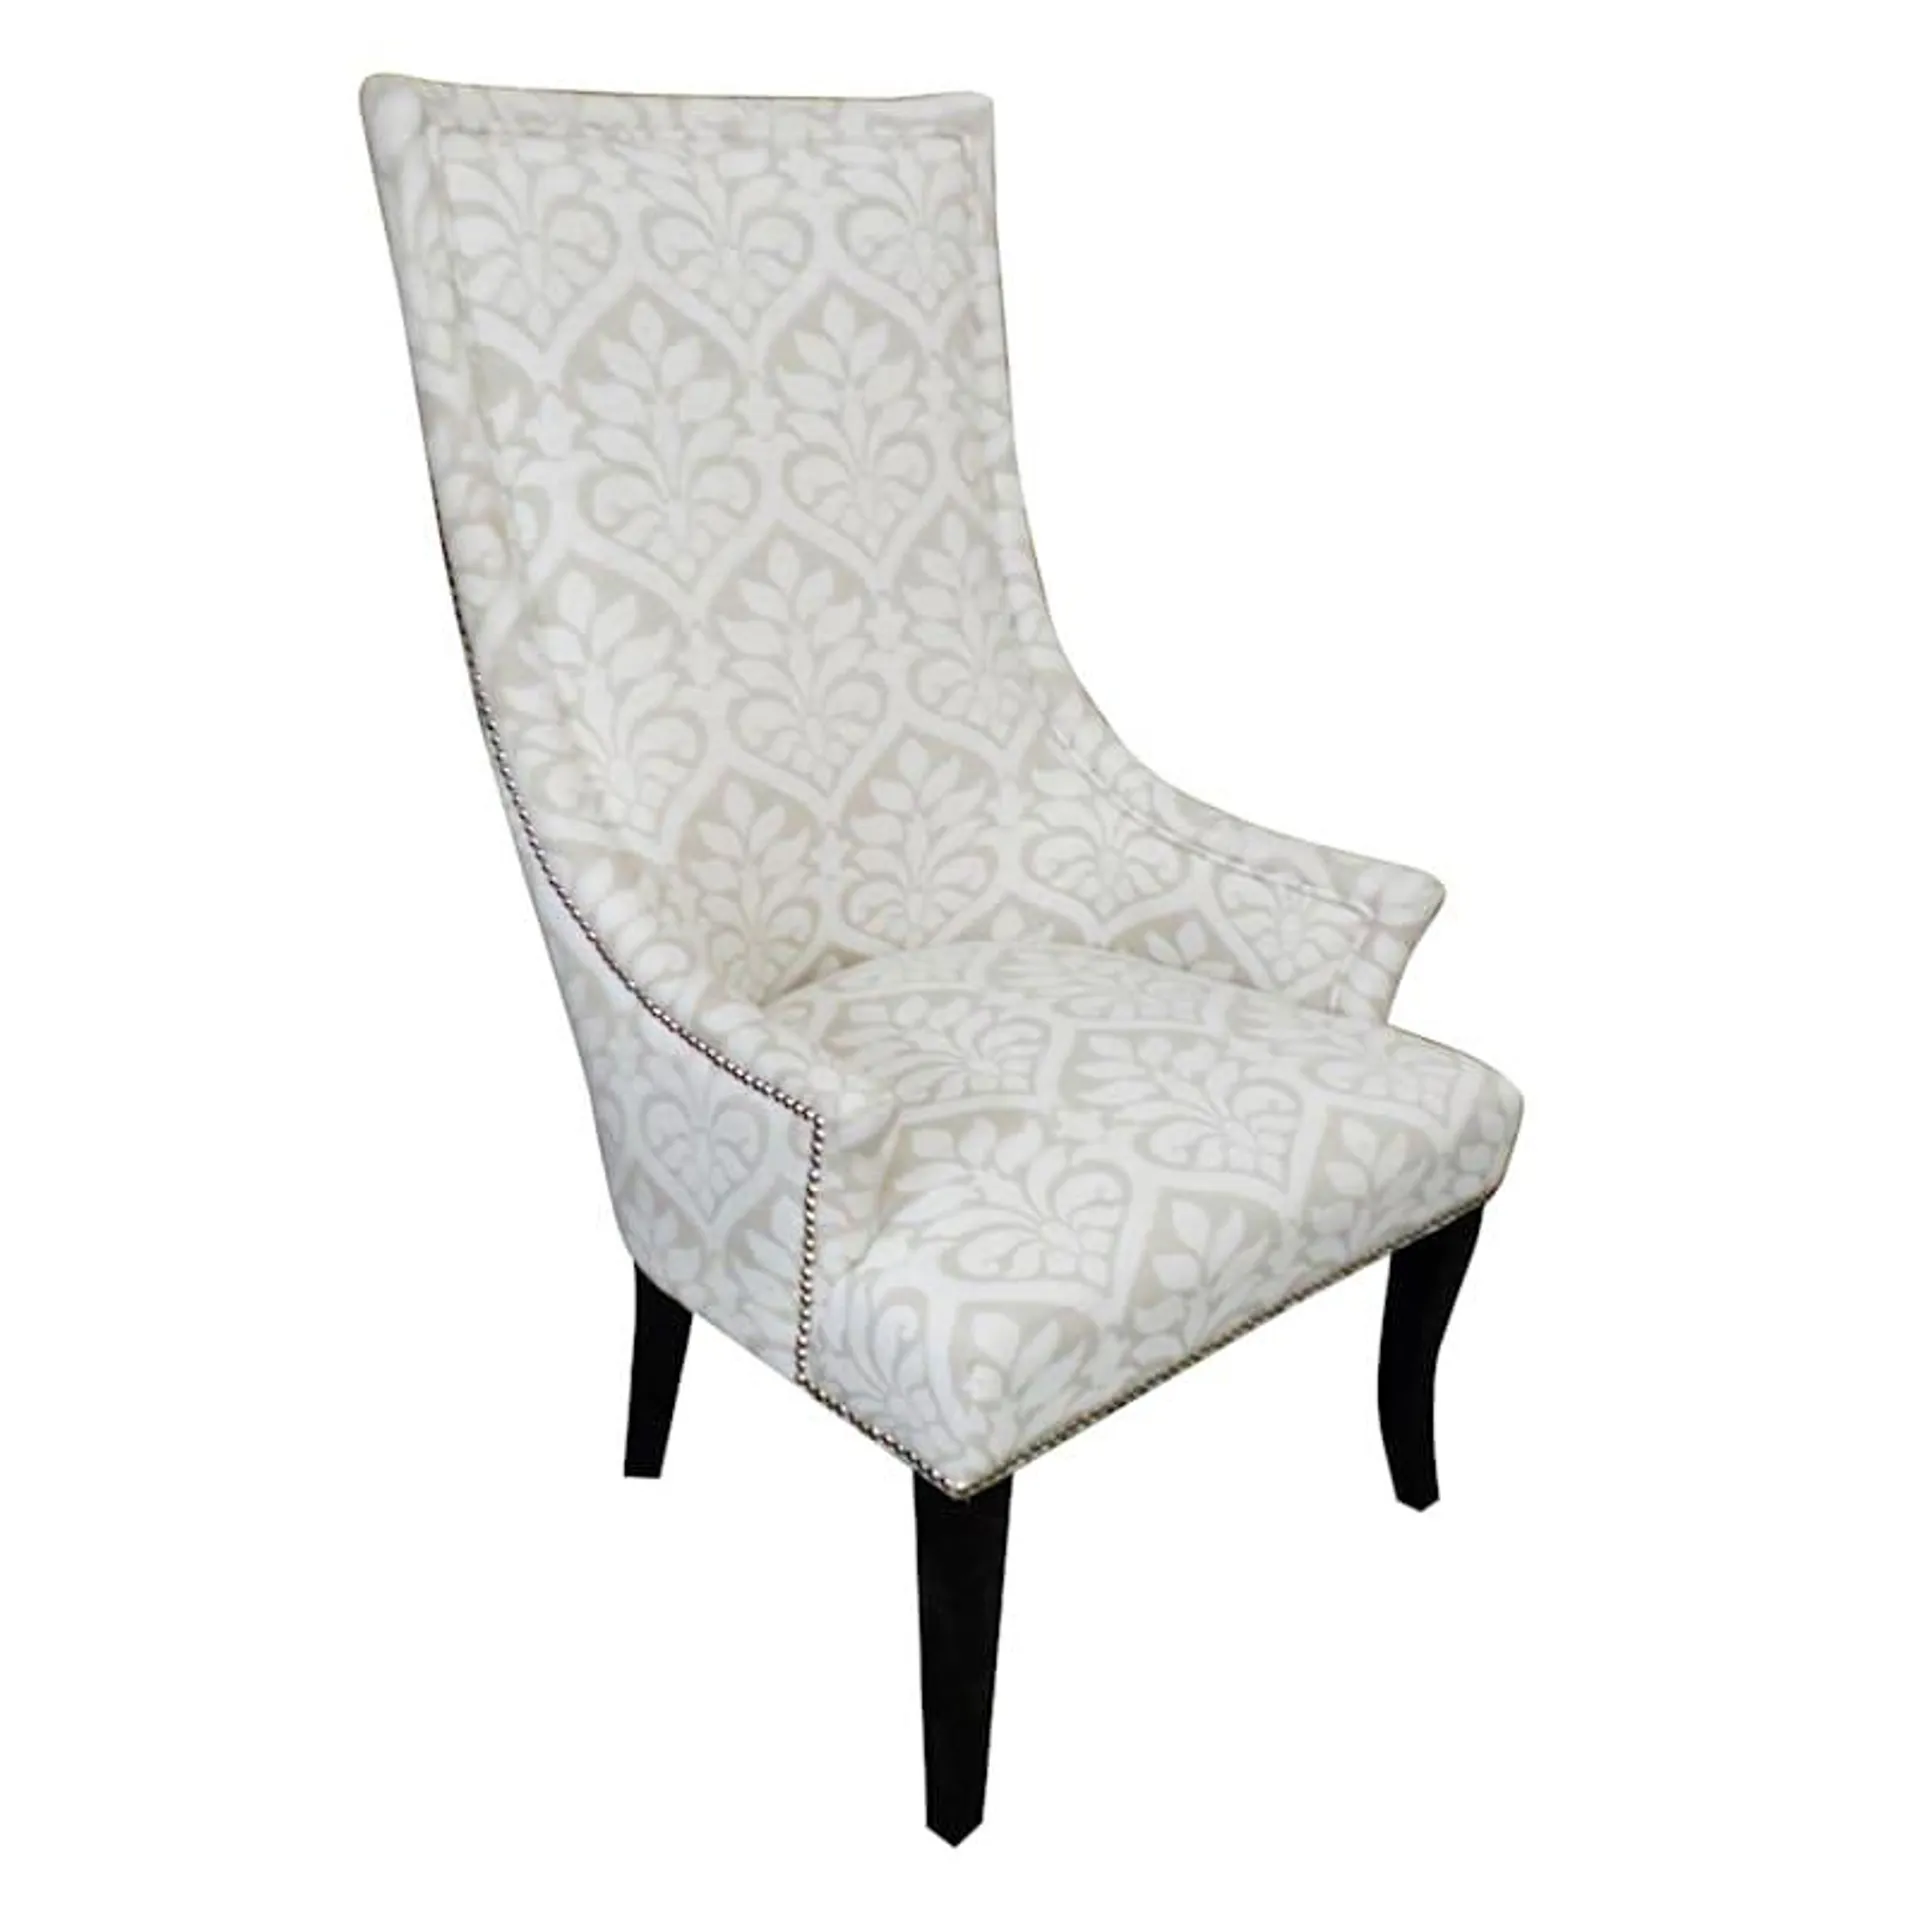 Chatham Accent Chair, Fiona White